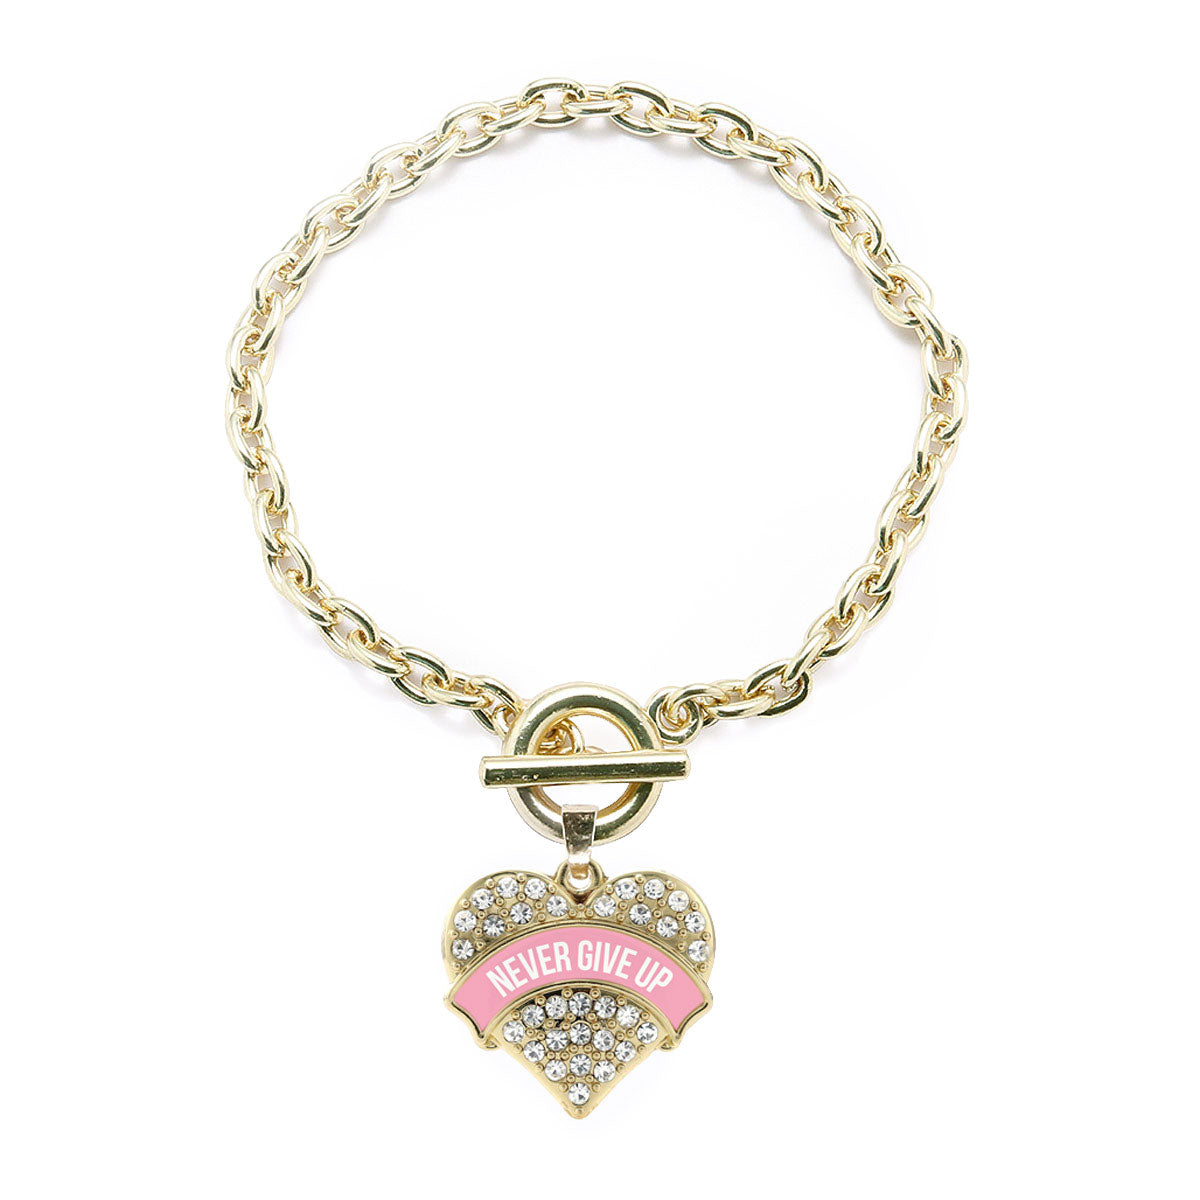 Gold Never Give Up Pink Breast Cancer Support Pave Heart Charm Toggle Bracelet